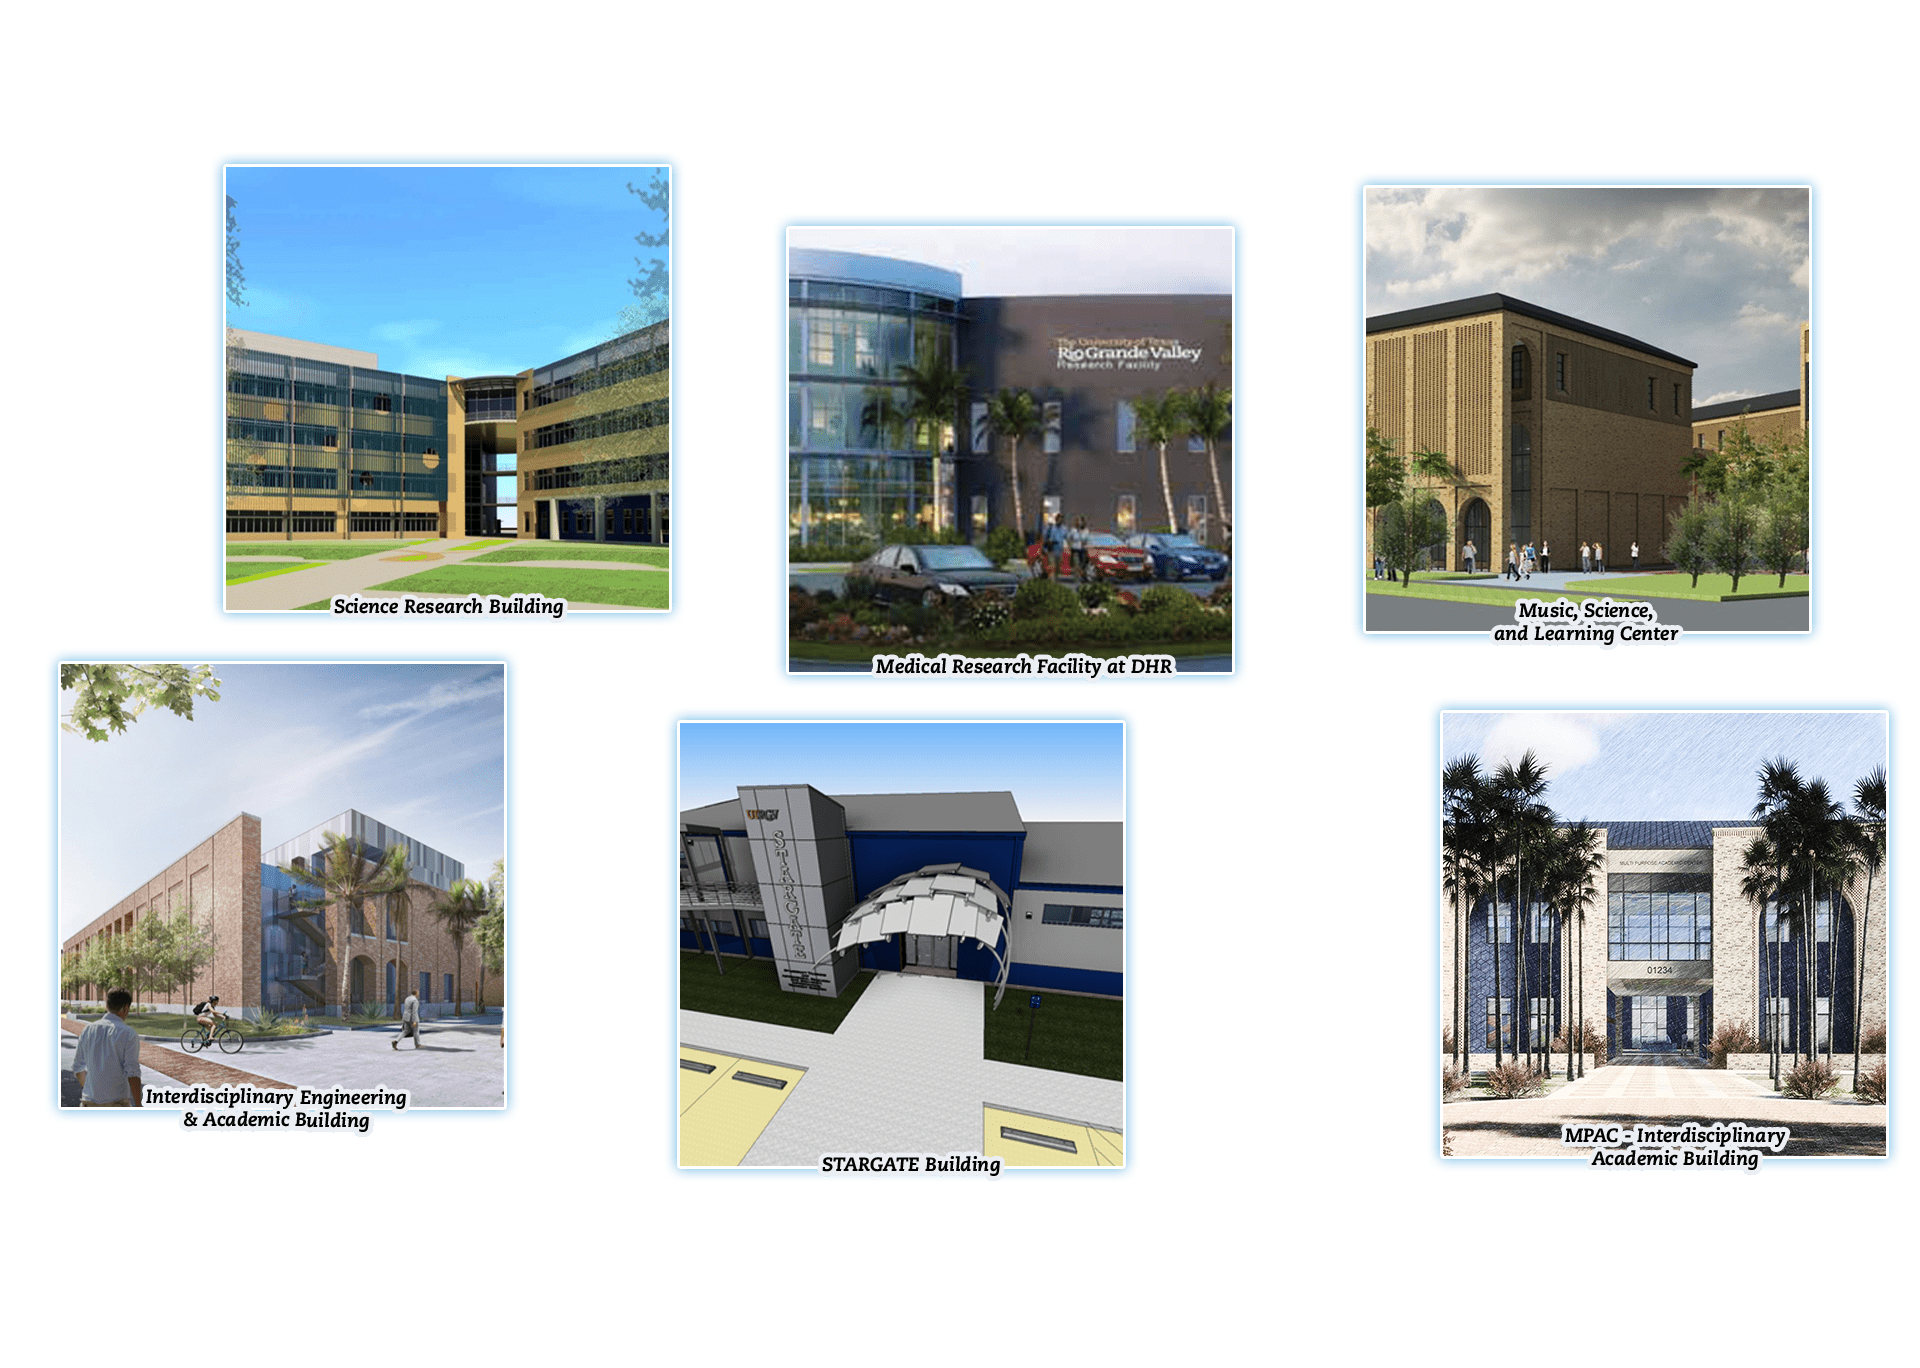 Graphic renders of future UTRGV buildings: Science Research Building, Interdisciplinary, Engineering and Academic Building, Medical Research Facility at DHR, Music, Science, and Learning Center, STARGATE Building, MPAC - Interdisciplinary Academic Building